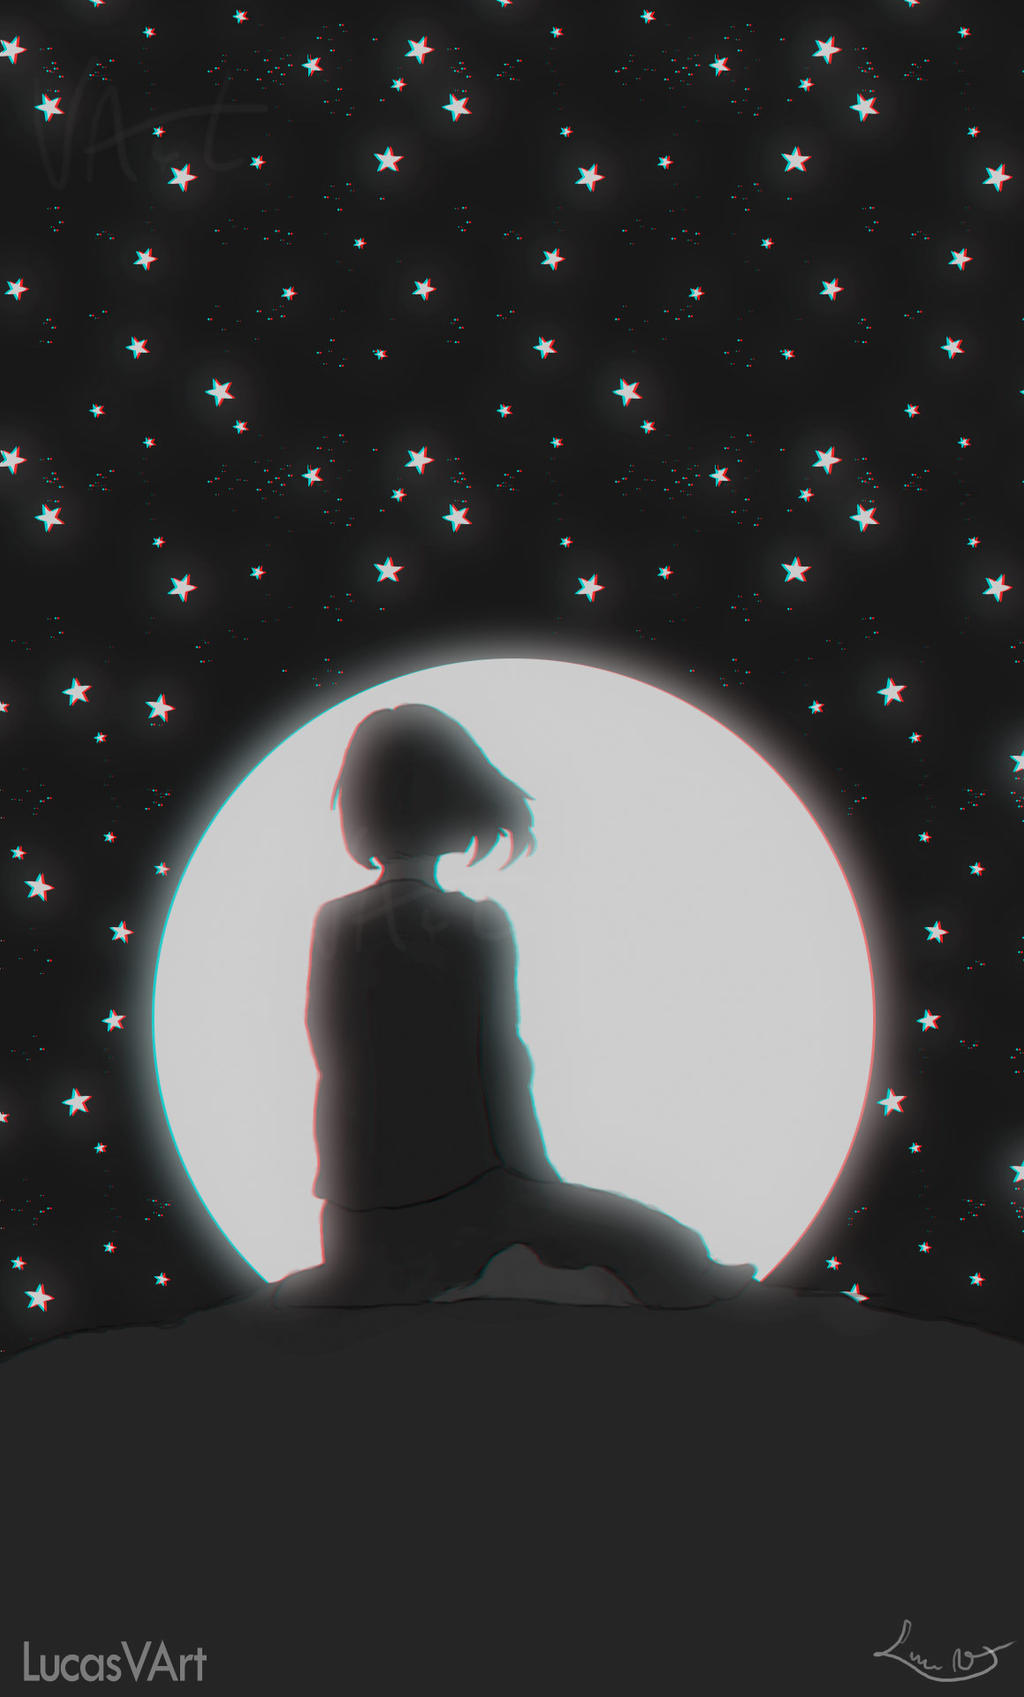 Alone with the Moon by LucasVArt on DeviantArt